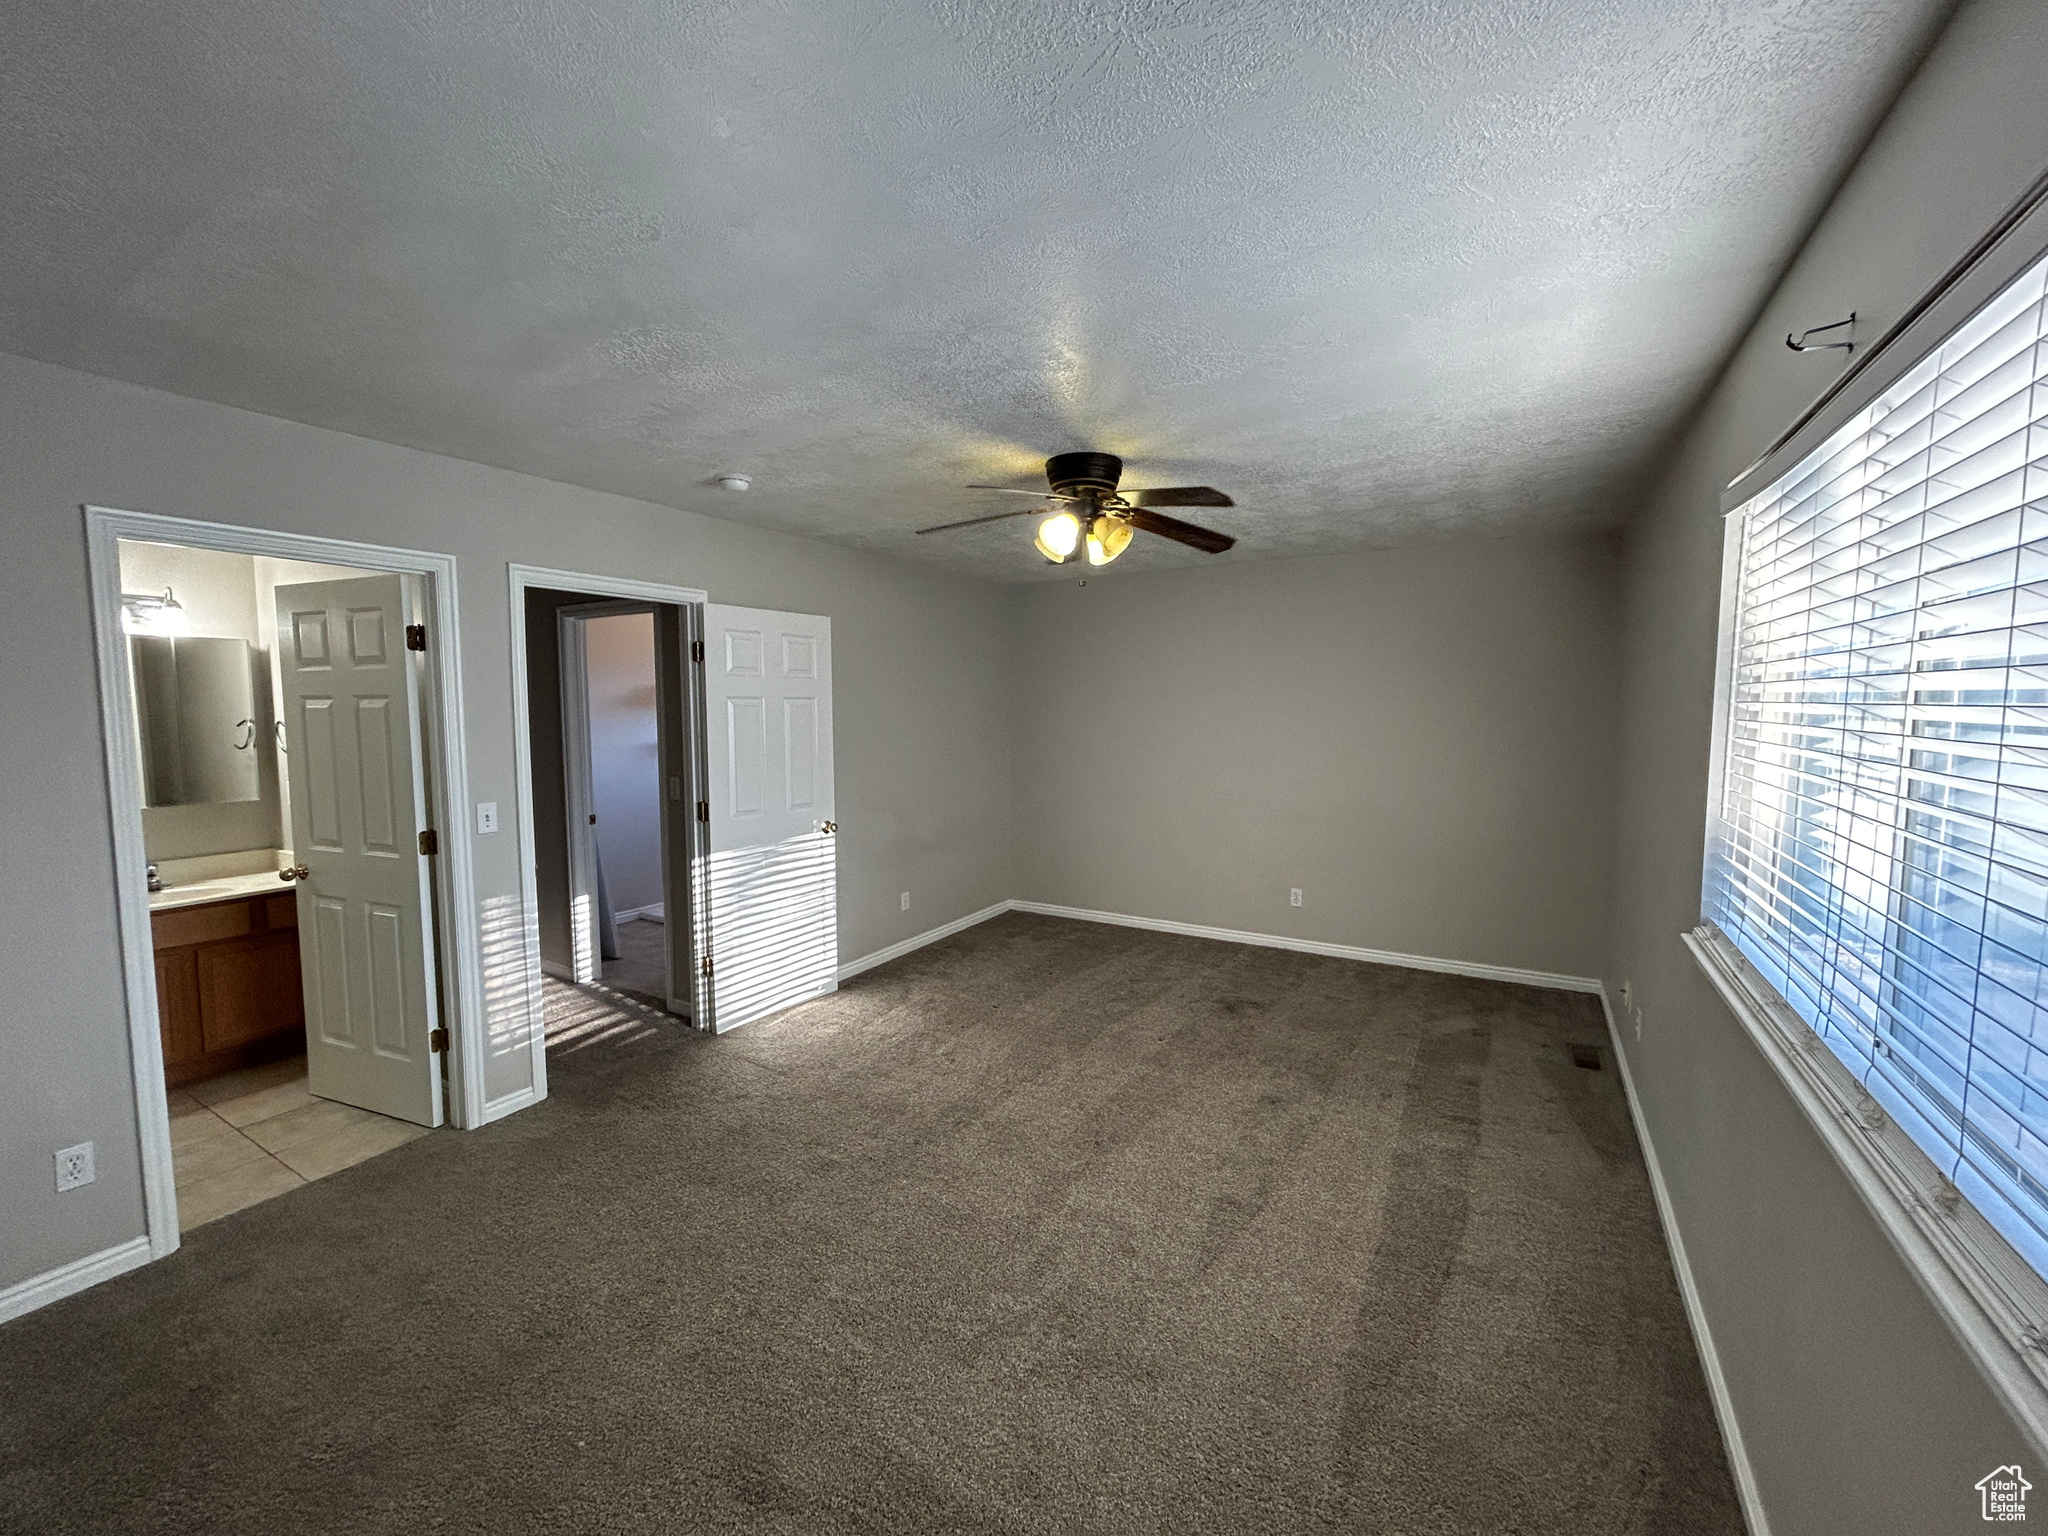 Master Bedroom with a textured ceiling, ceiling fan, and light colored carpet